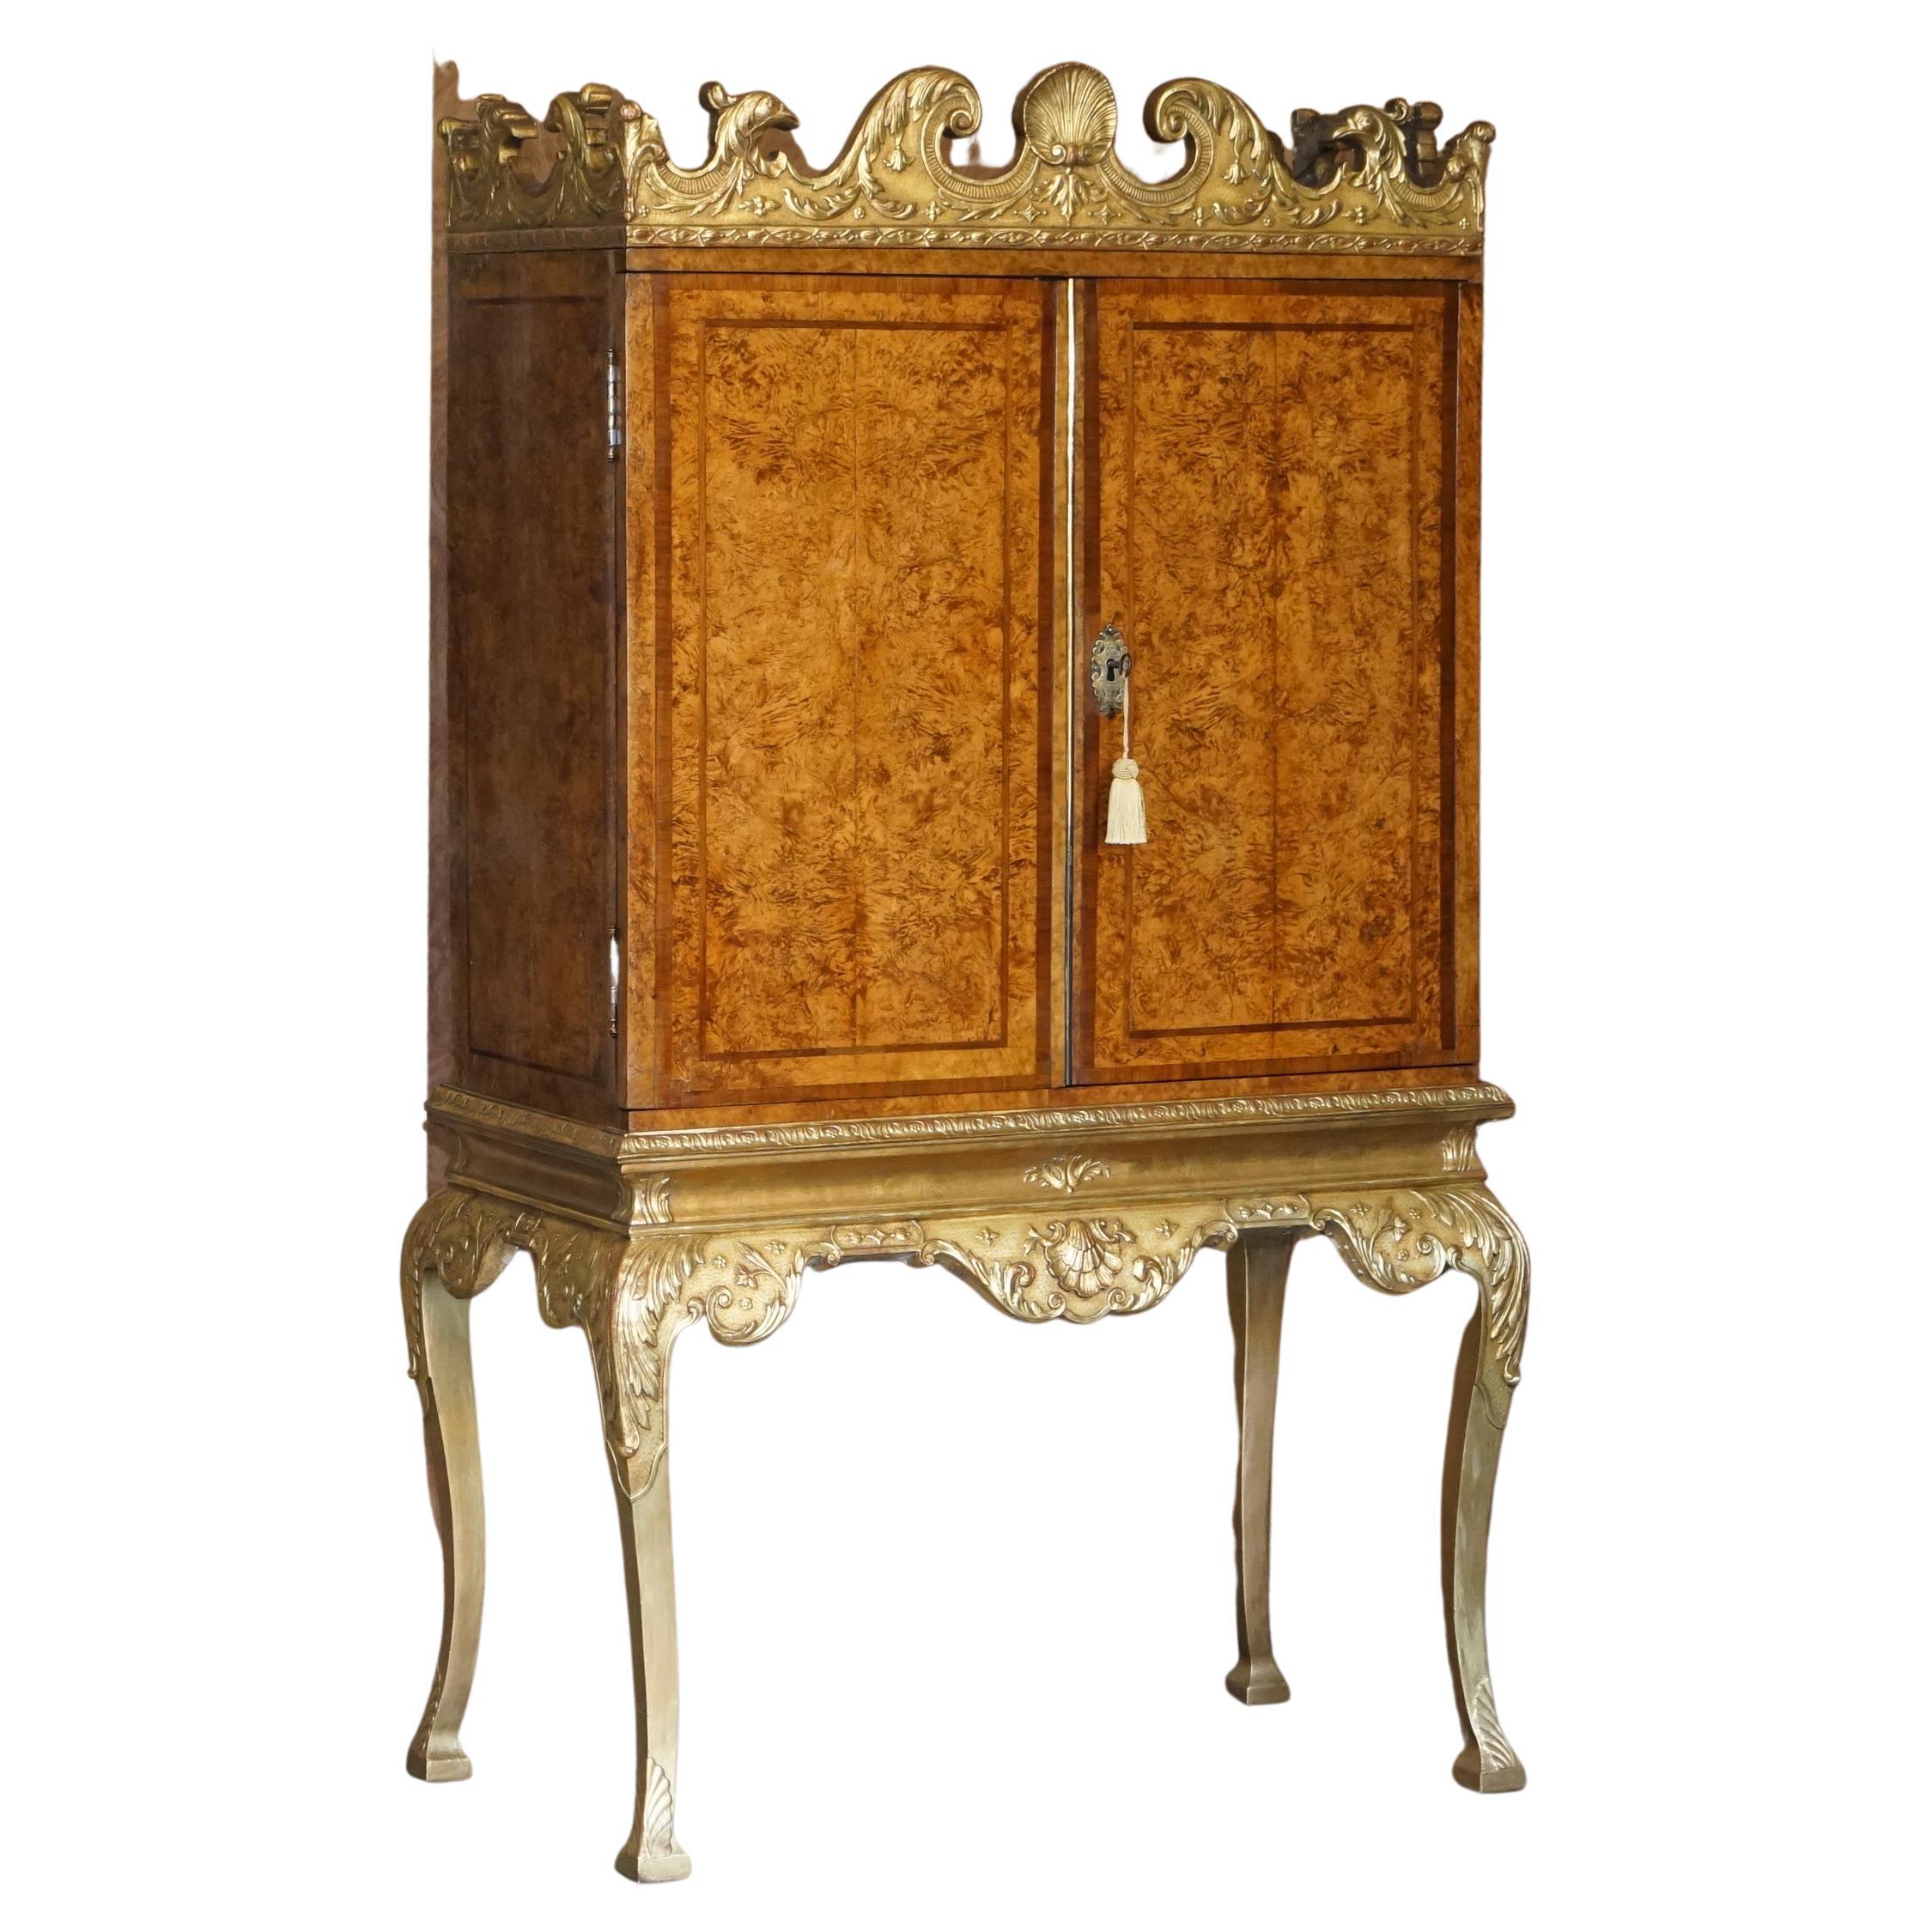 Important Antique George II circa 1740 Mulberry Wood Giltwood Drinks Cabinet For Sale